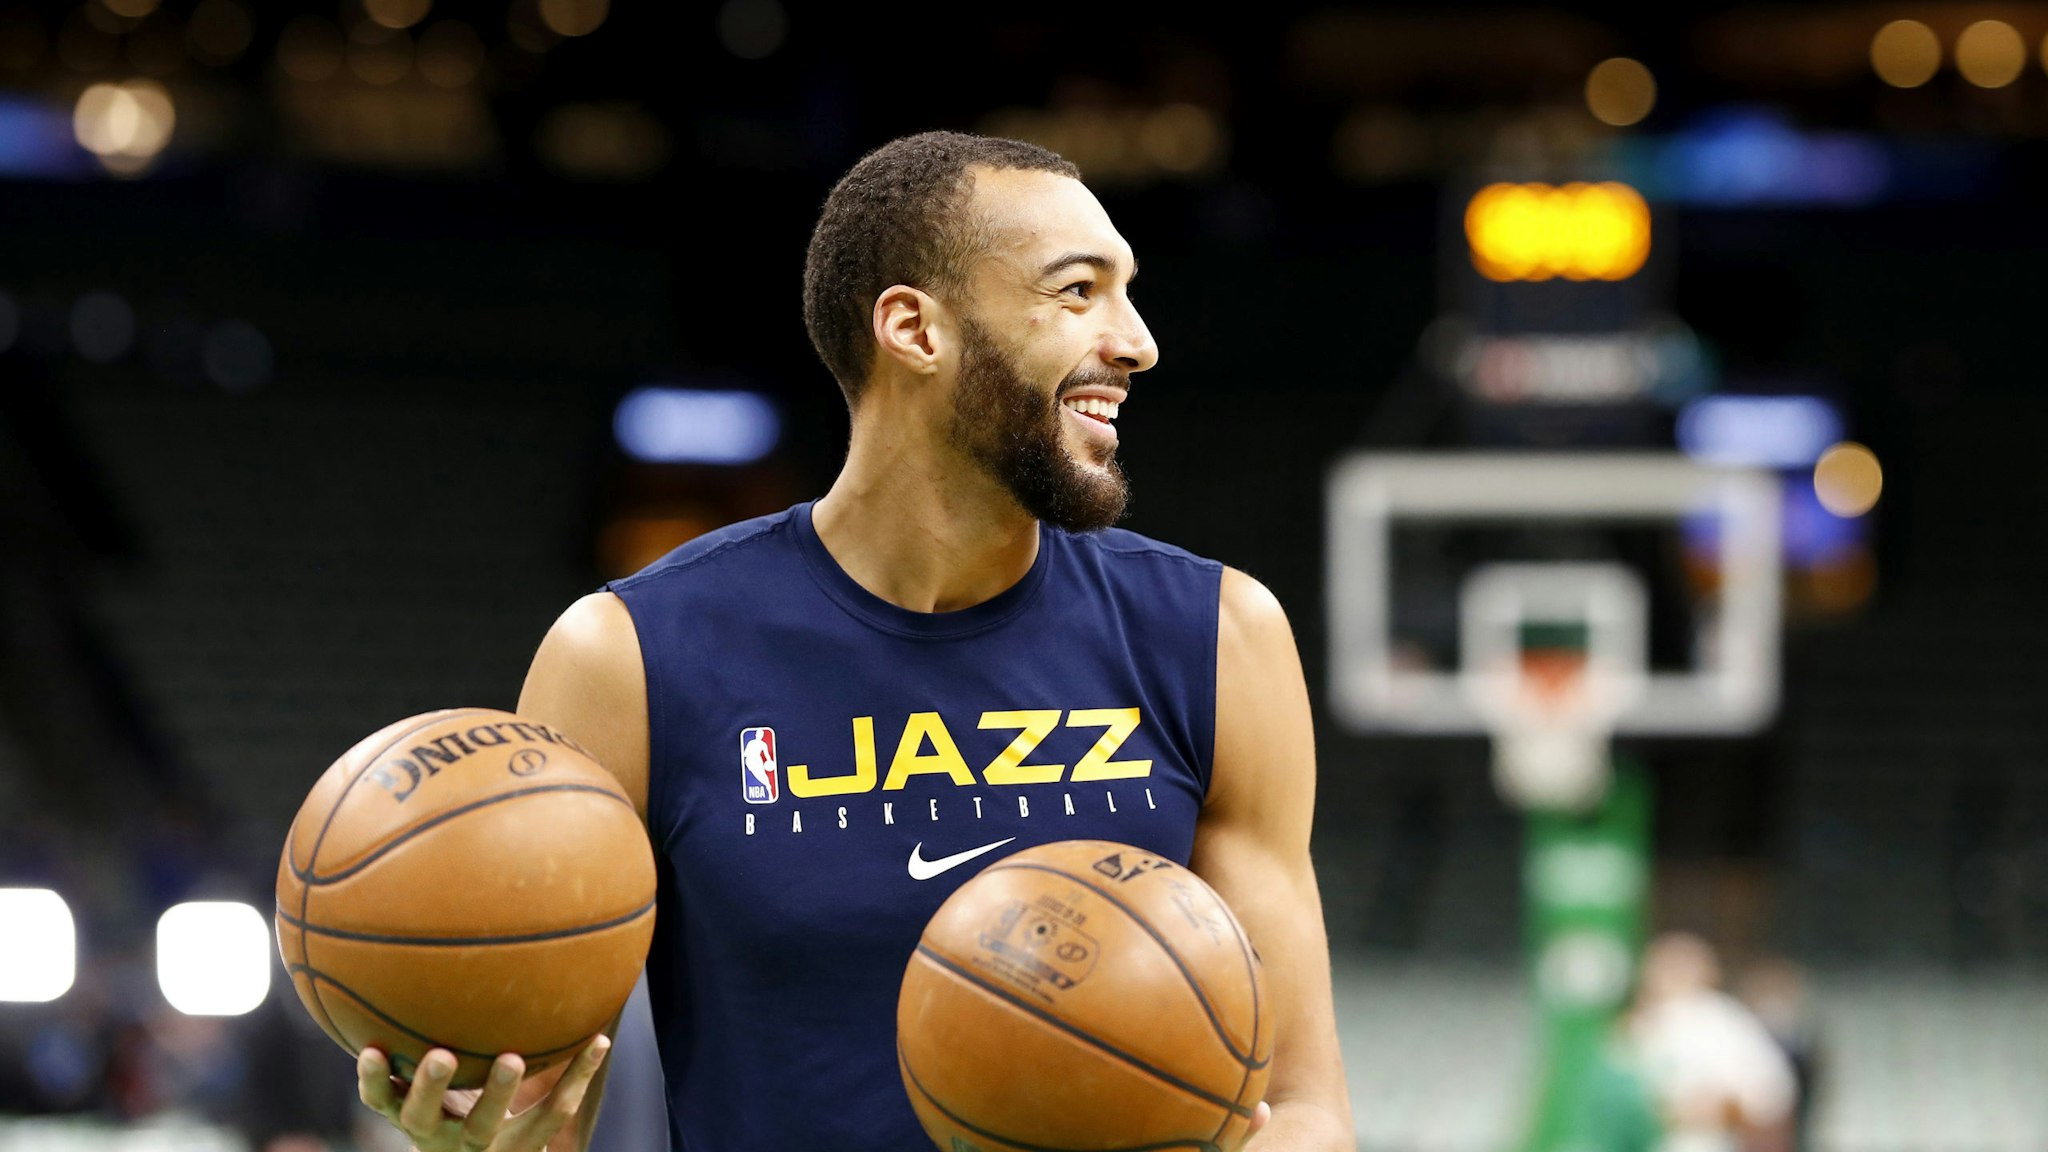 BOSTON, MASSACHUSETTS - MARCH 06: Rudy Gobert #27 of the Utah Jazz warms up before the game against the Boston Celtics at TD Garden on March 06, 2020 in Boston, Massachusetts.